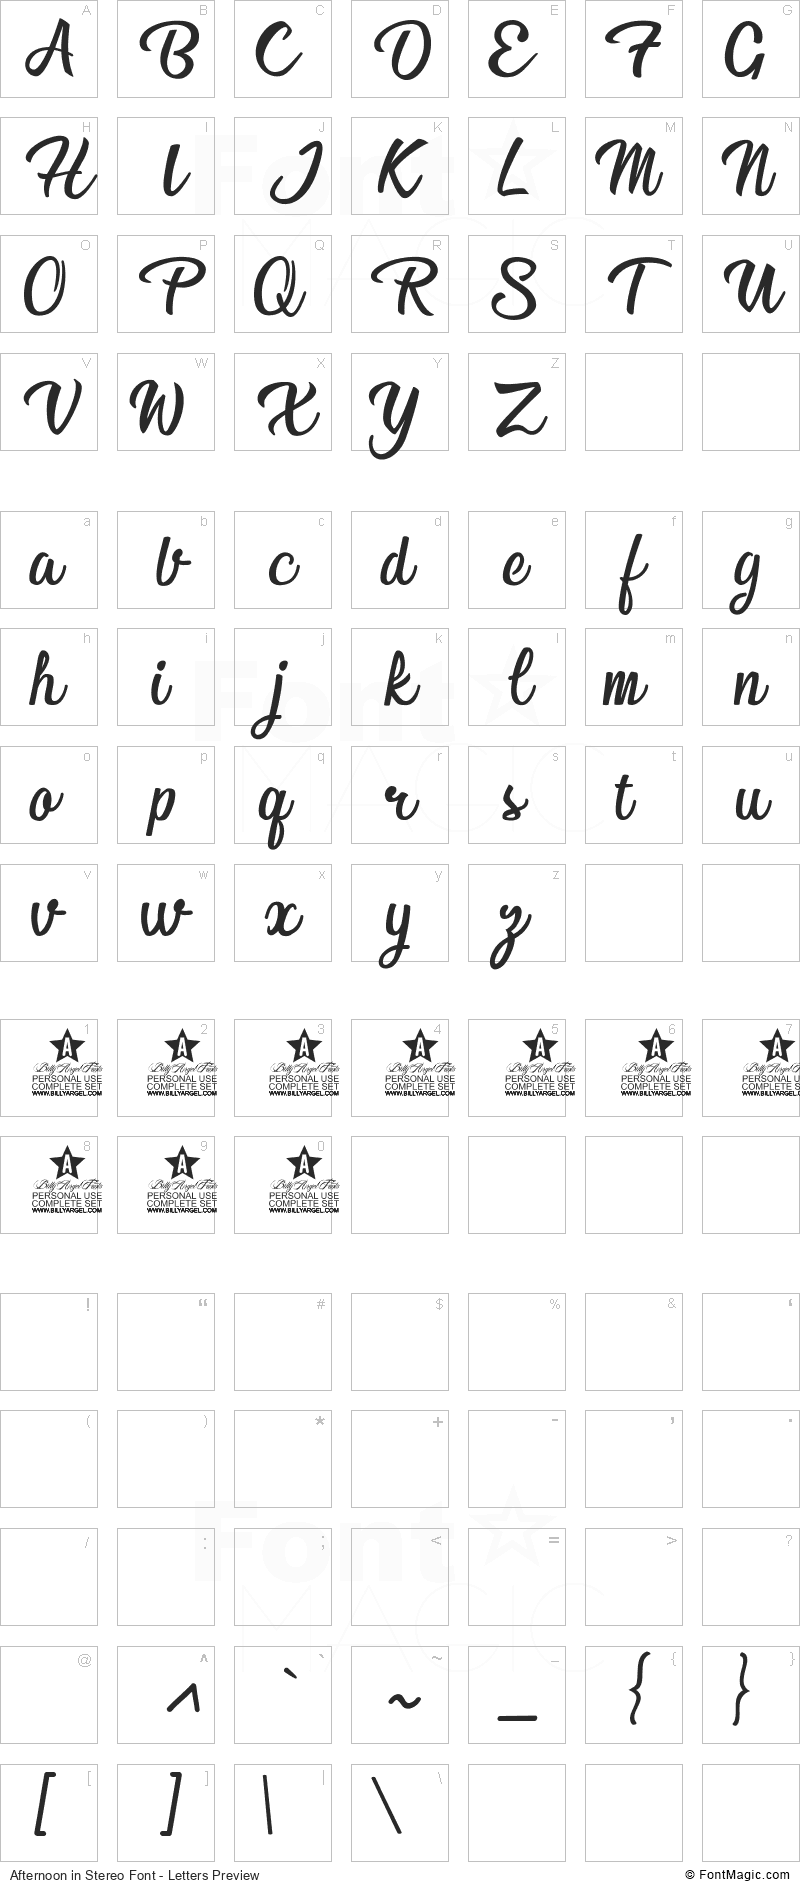 Afternoon in Stereo Font - All Latters Preview Chart